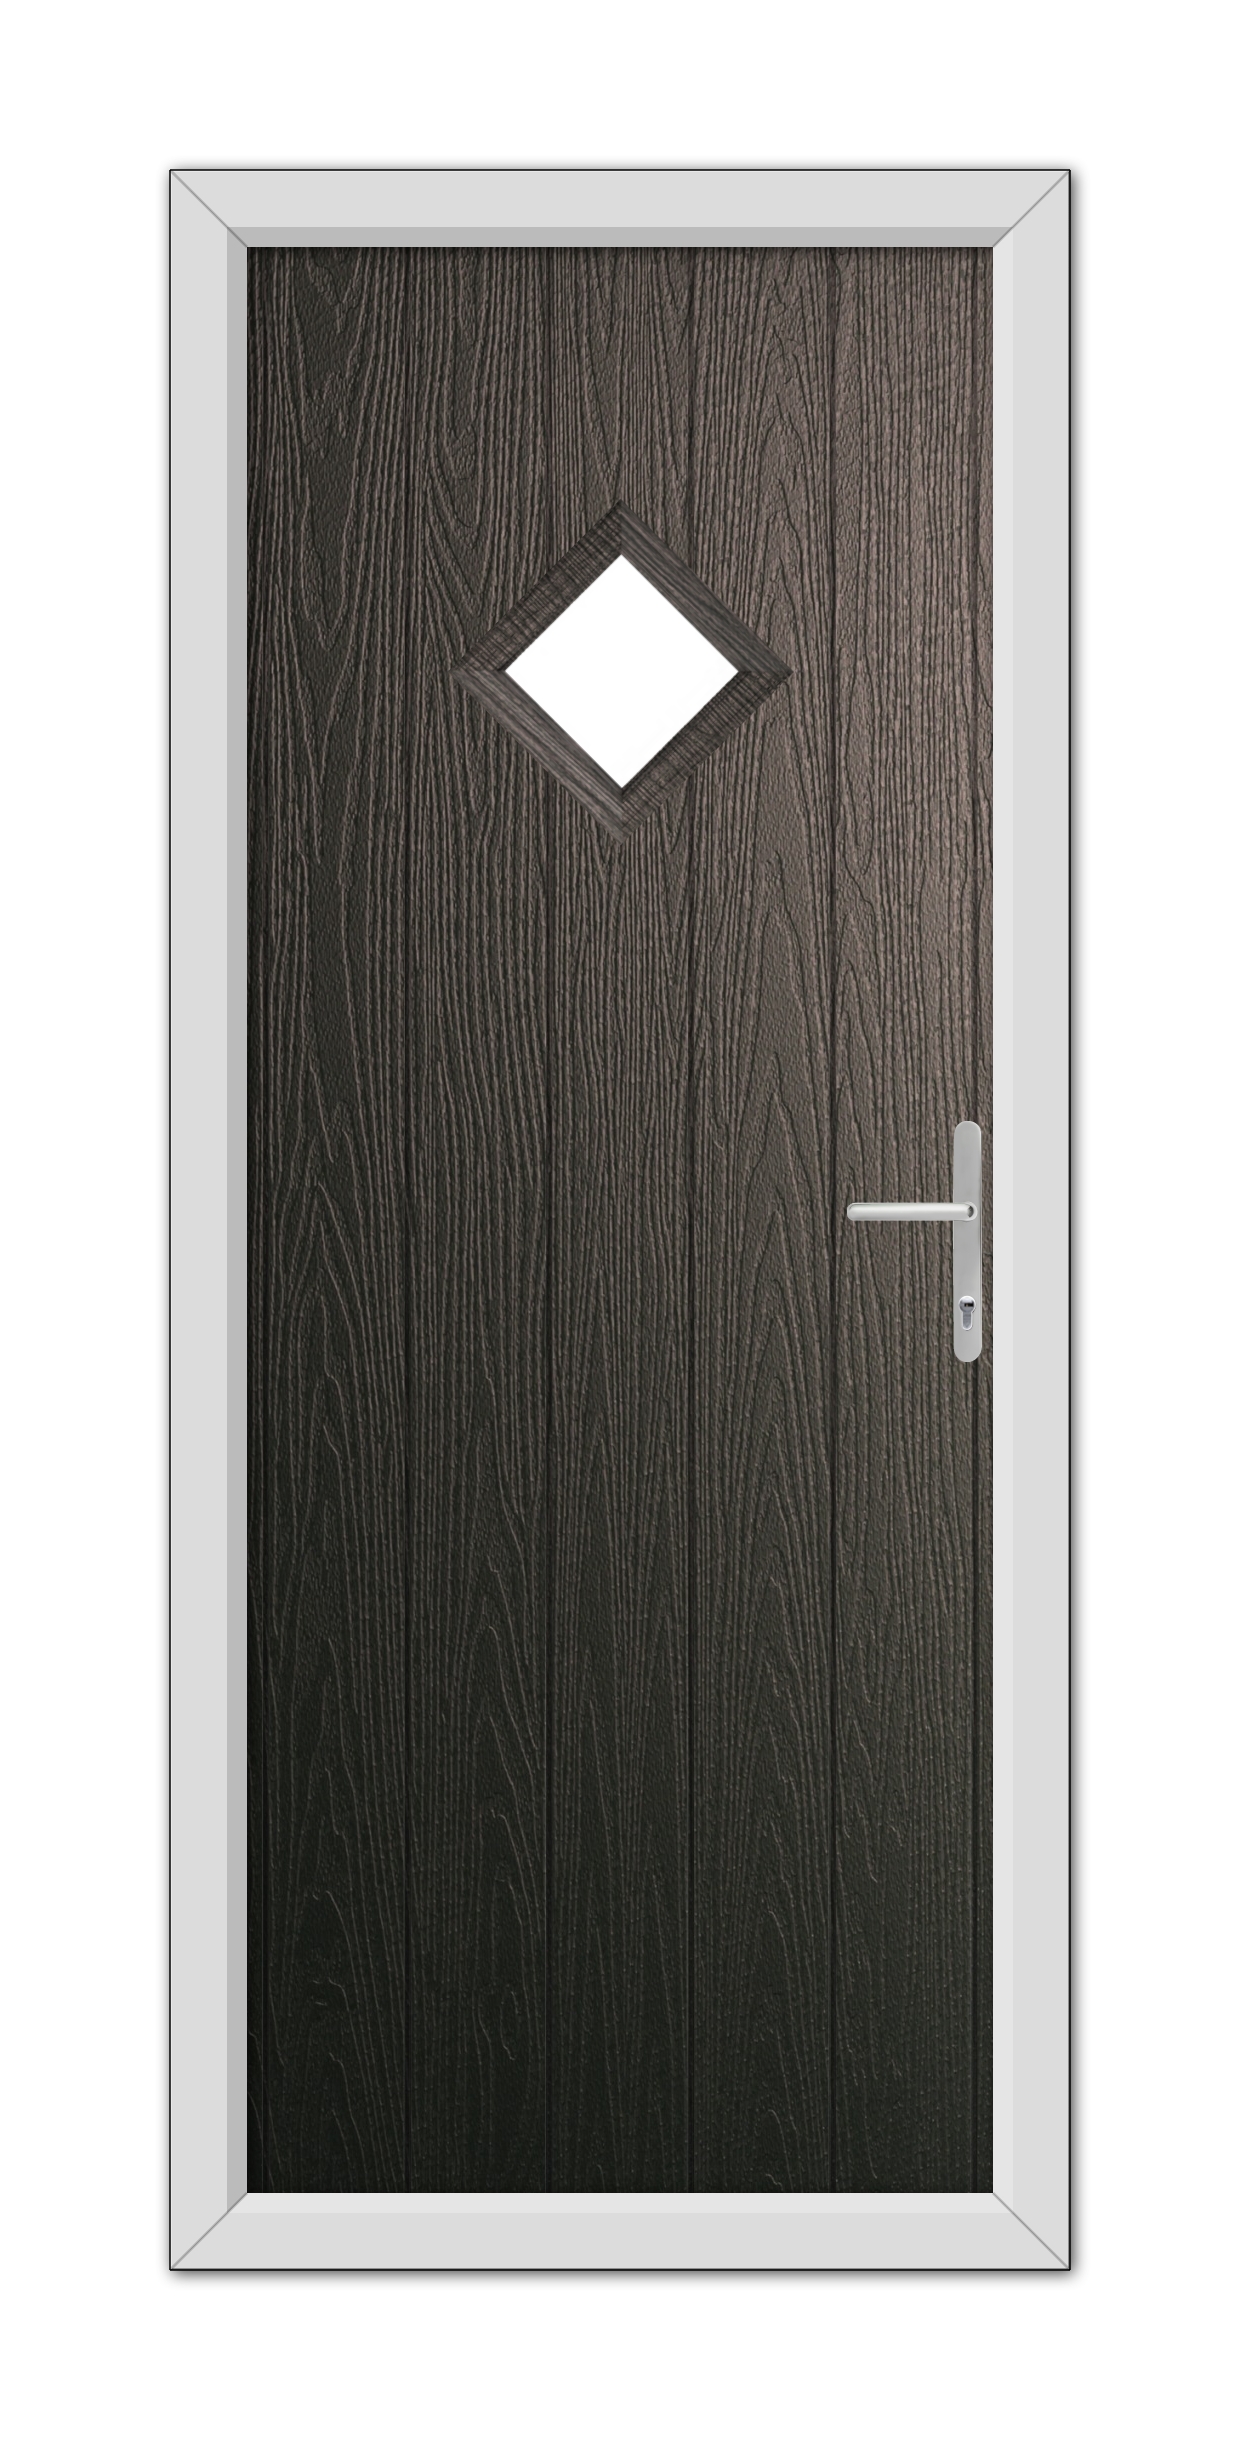 A Schwarzbraun Cornwall Composite Door 48mm Timber Core with a diamond-shaped window, set within a white frame, featuring a metallic handle on the right side.